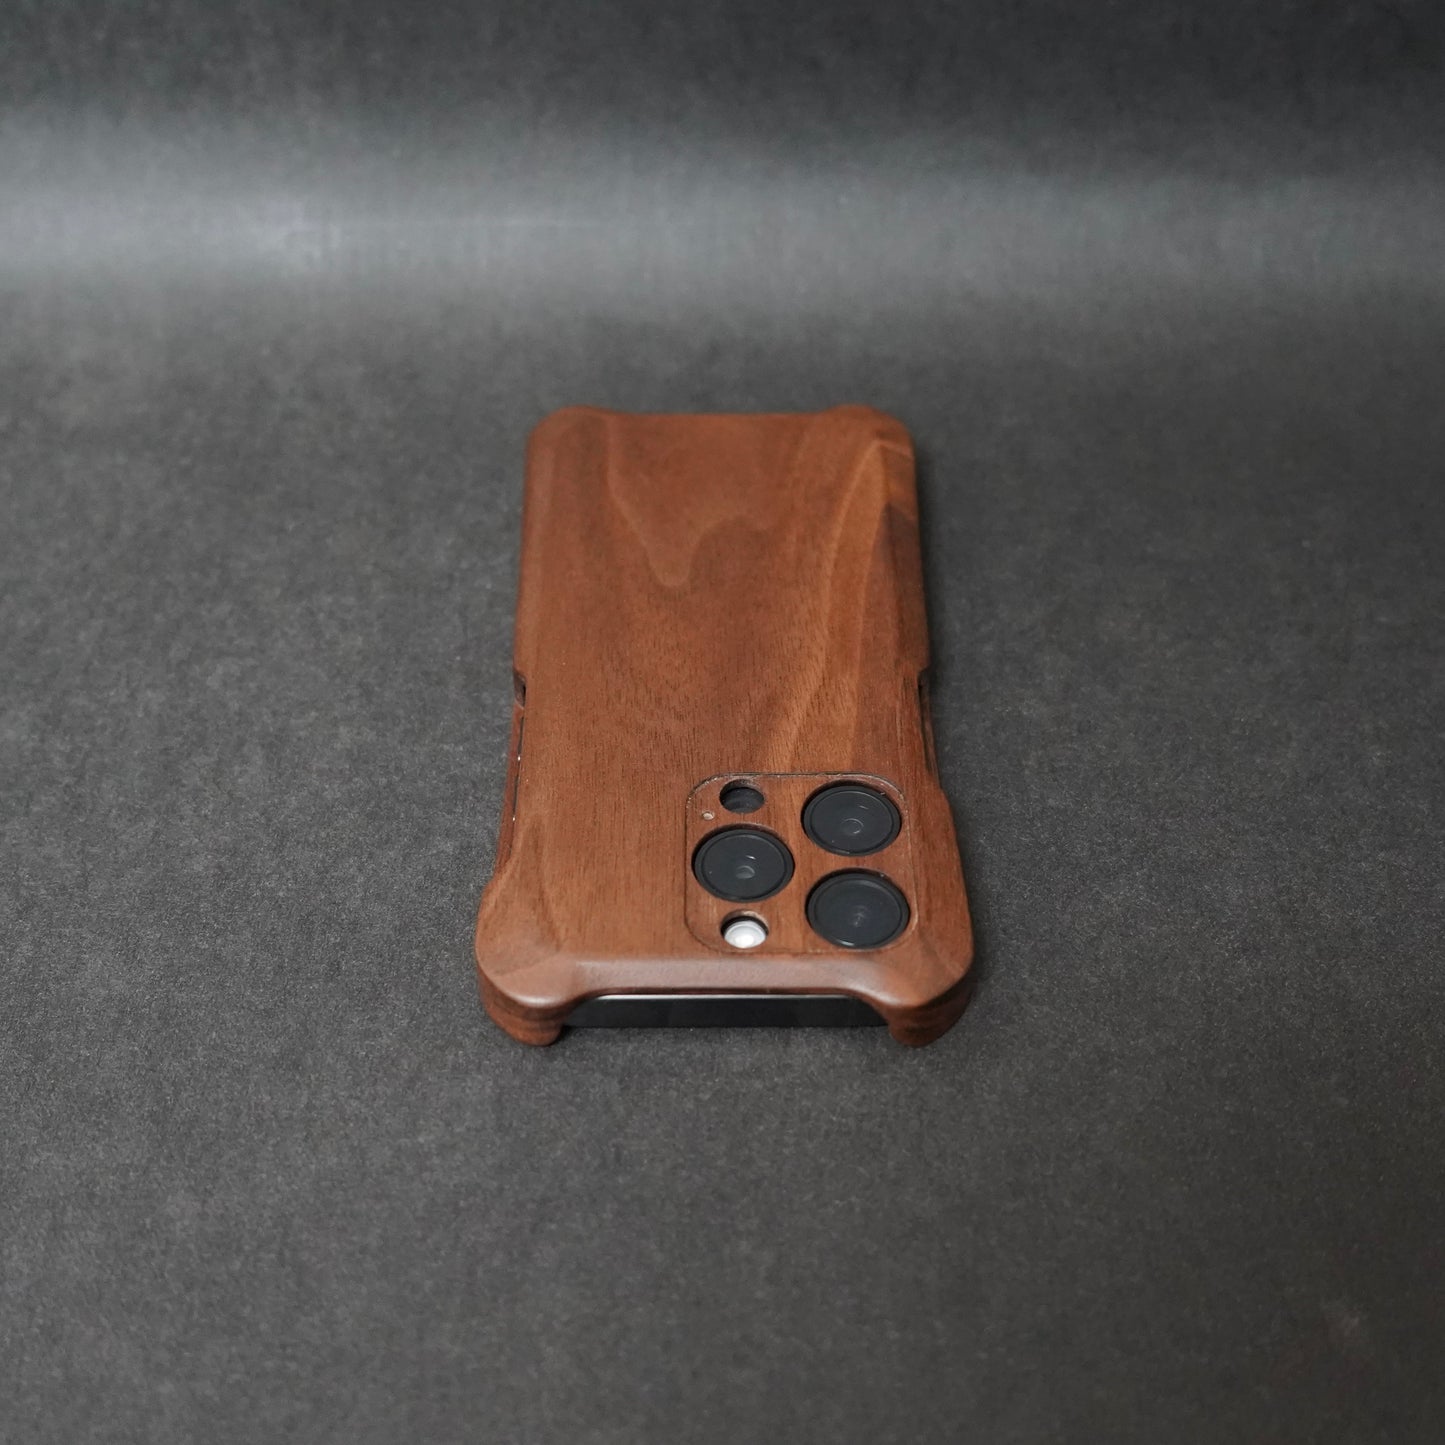 iPhone walnut solid wood phone case